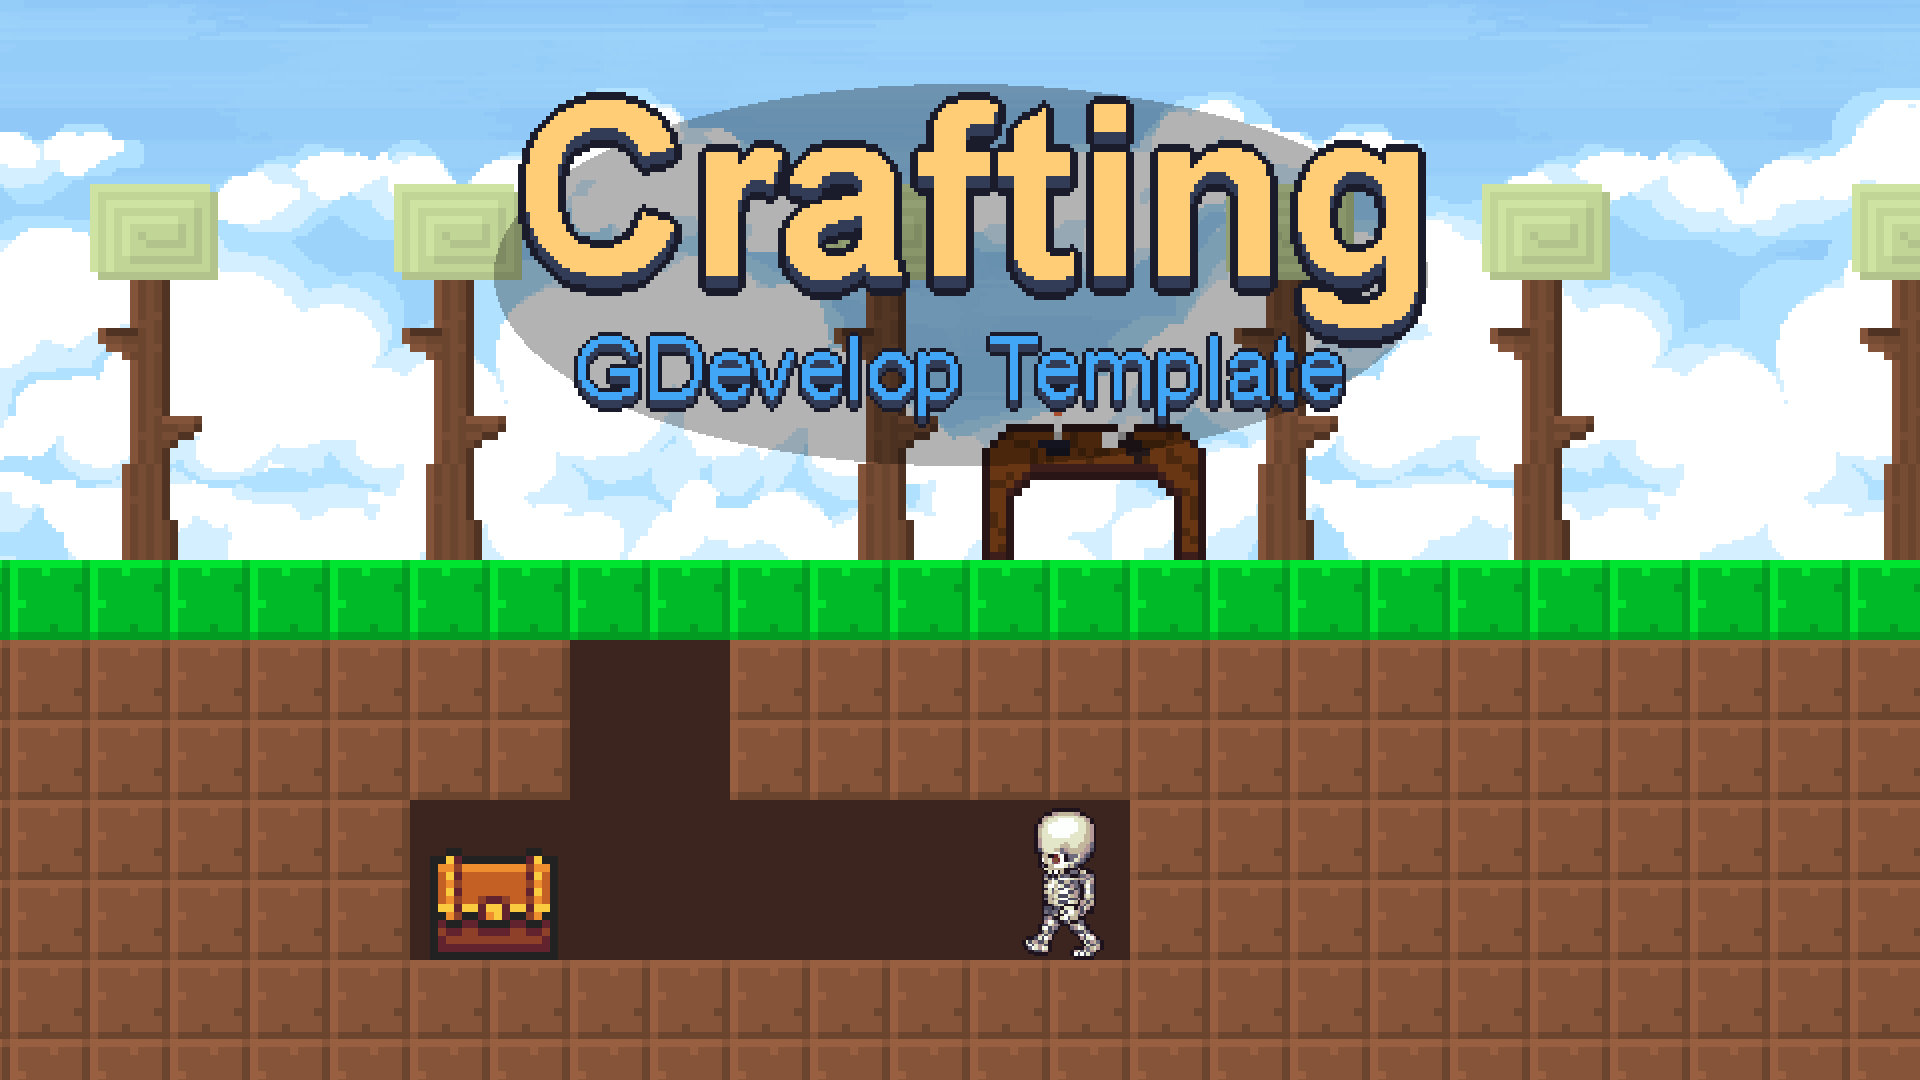 2D Crafting Game